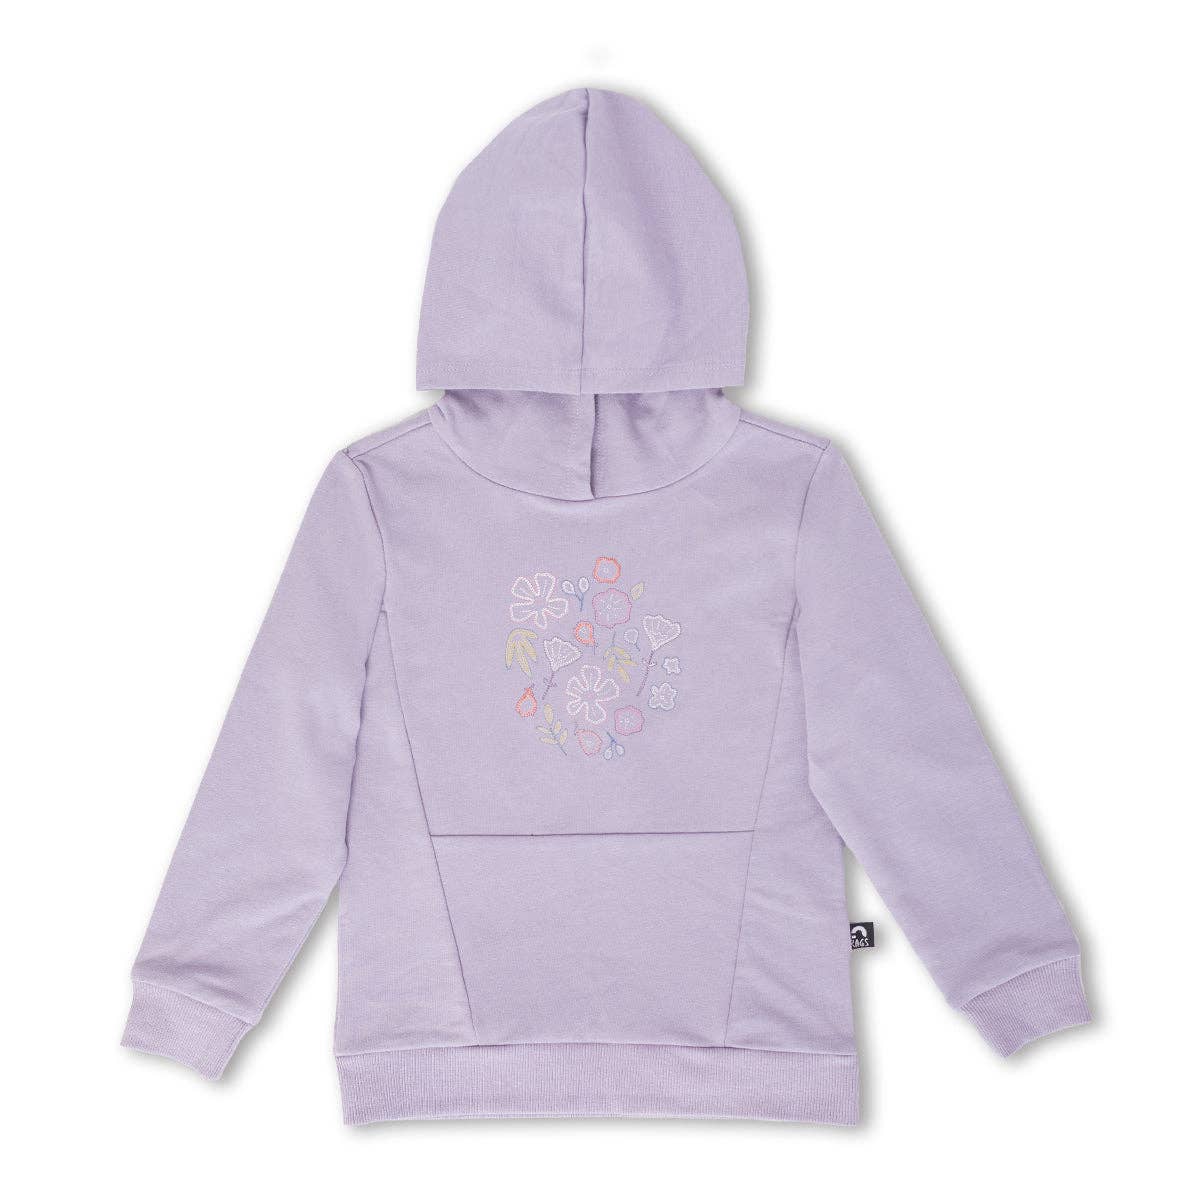 RAGS - Kids Hoodie with Seam Details - 'Chainstitch Floral - Lilac